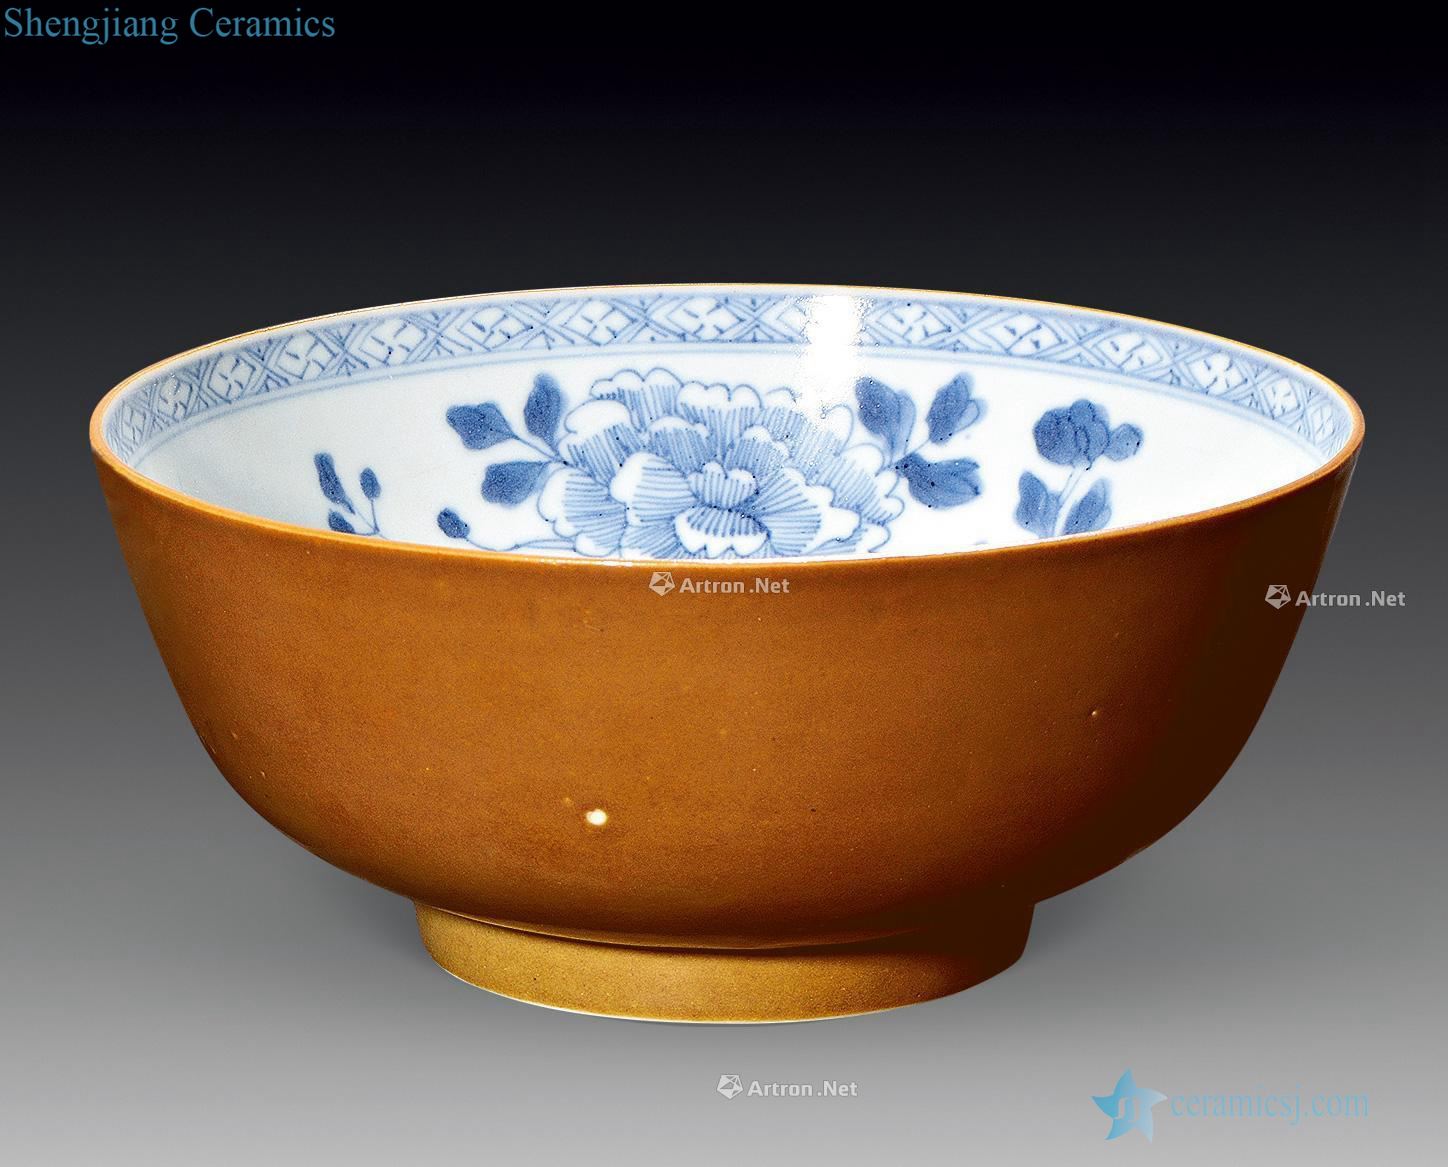 Ming sauce glaze blue and white flowers green-splashed bowls